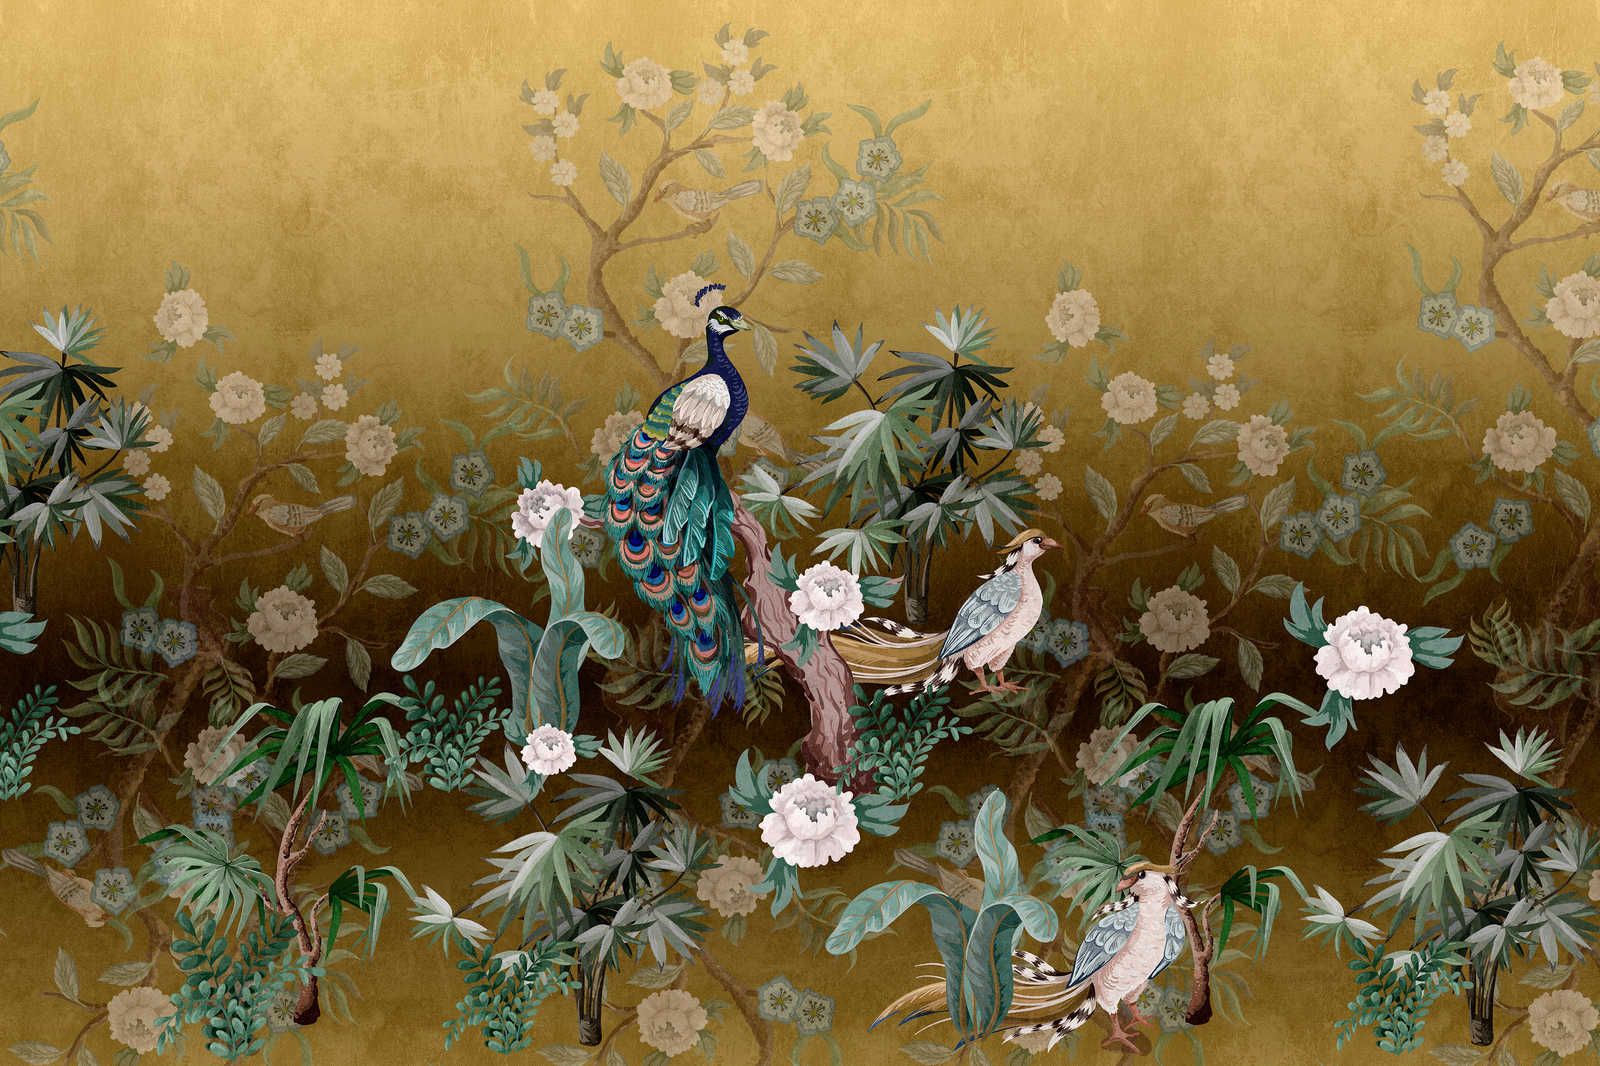             Peacock Island 3 - Canvas painting Peacocks Garden Gold with Plants & Blossoms - 0,90 m x 0,60 m
        